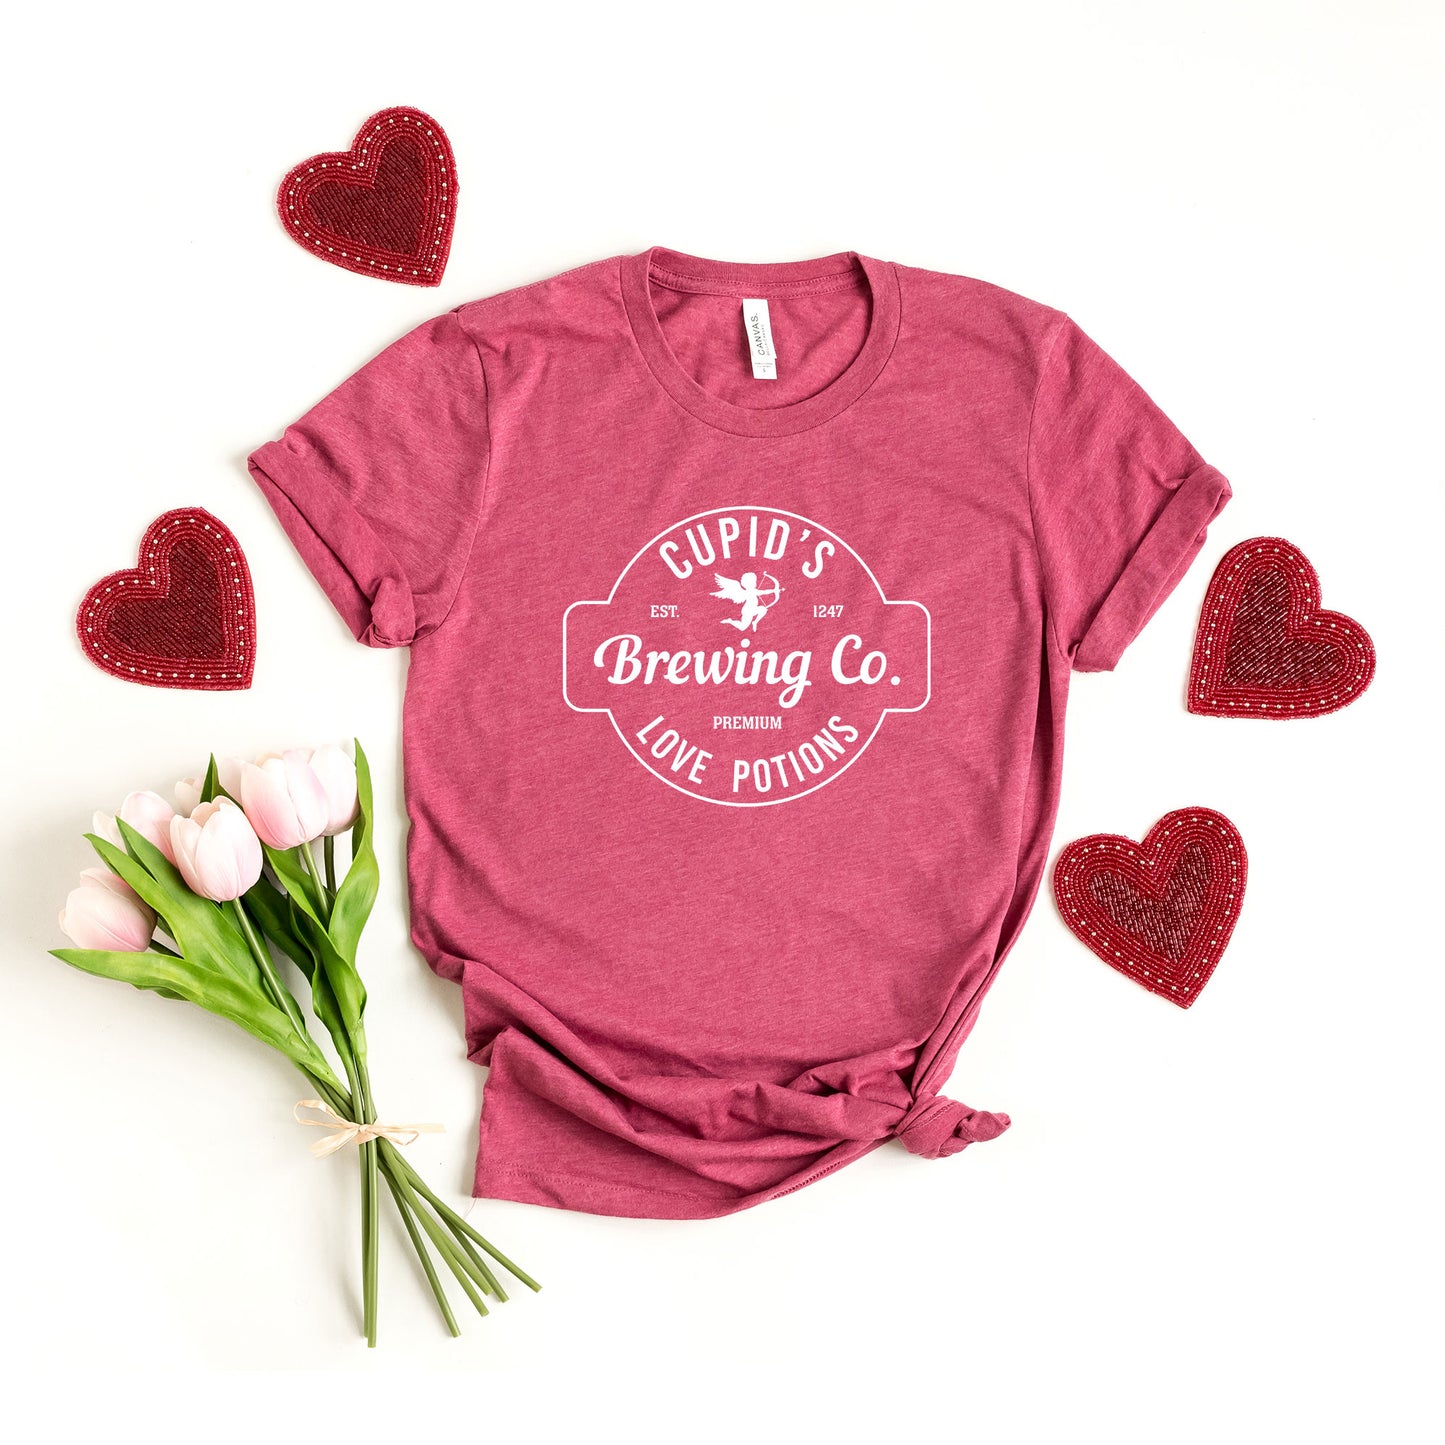 Cupid's Brewing Co. | Short Sleeve Graphic Tee